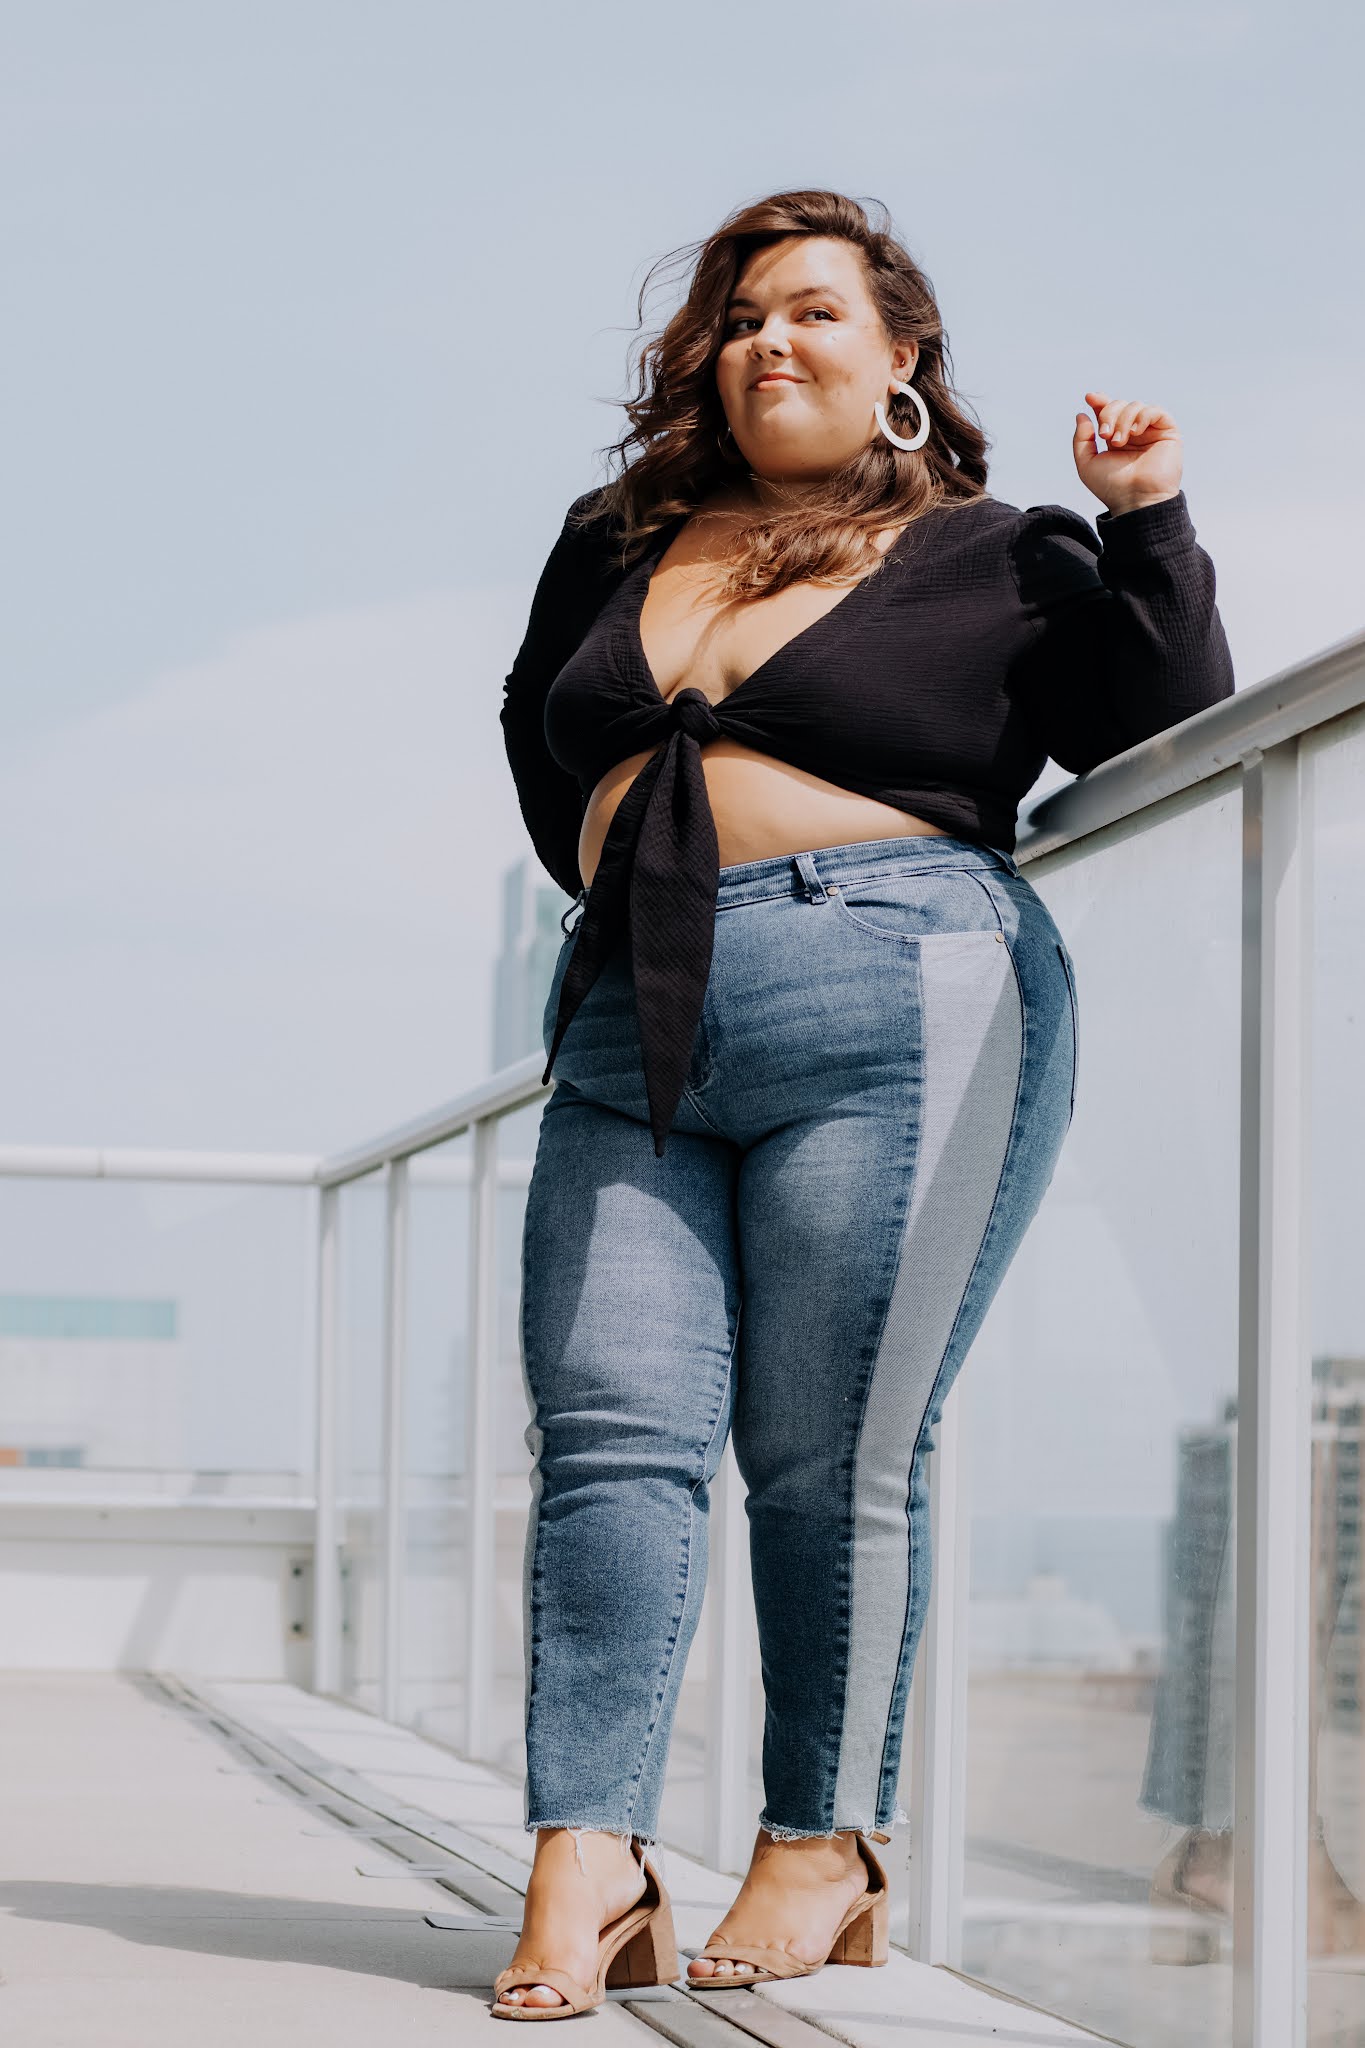 Natalie in the City shares what petite plus size means, how to dress a petite plus size body, and where to shop for petite plus clothing.